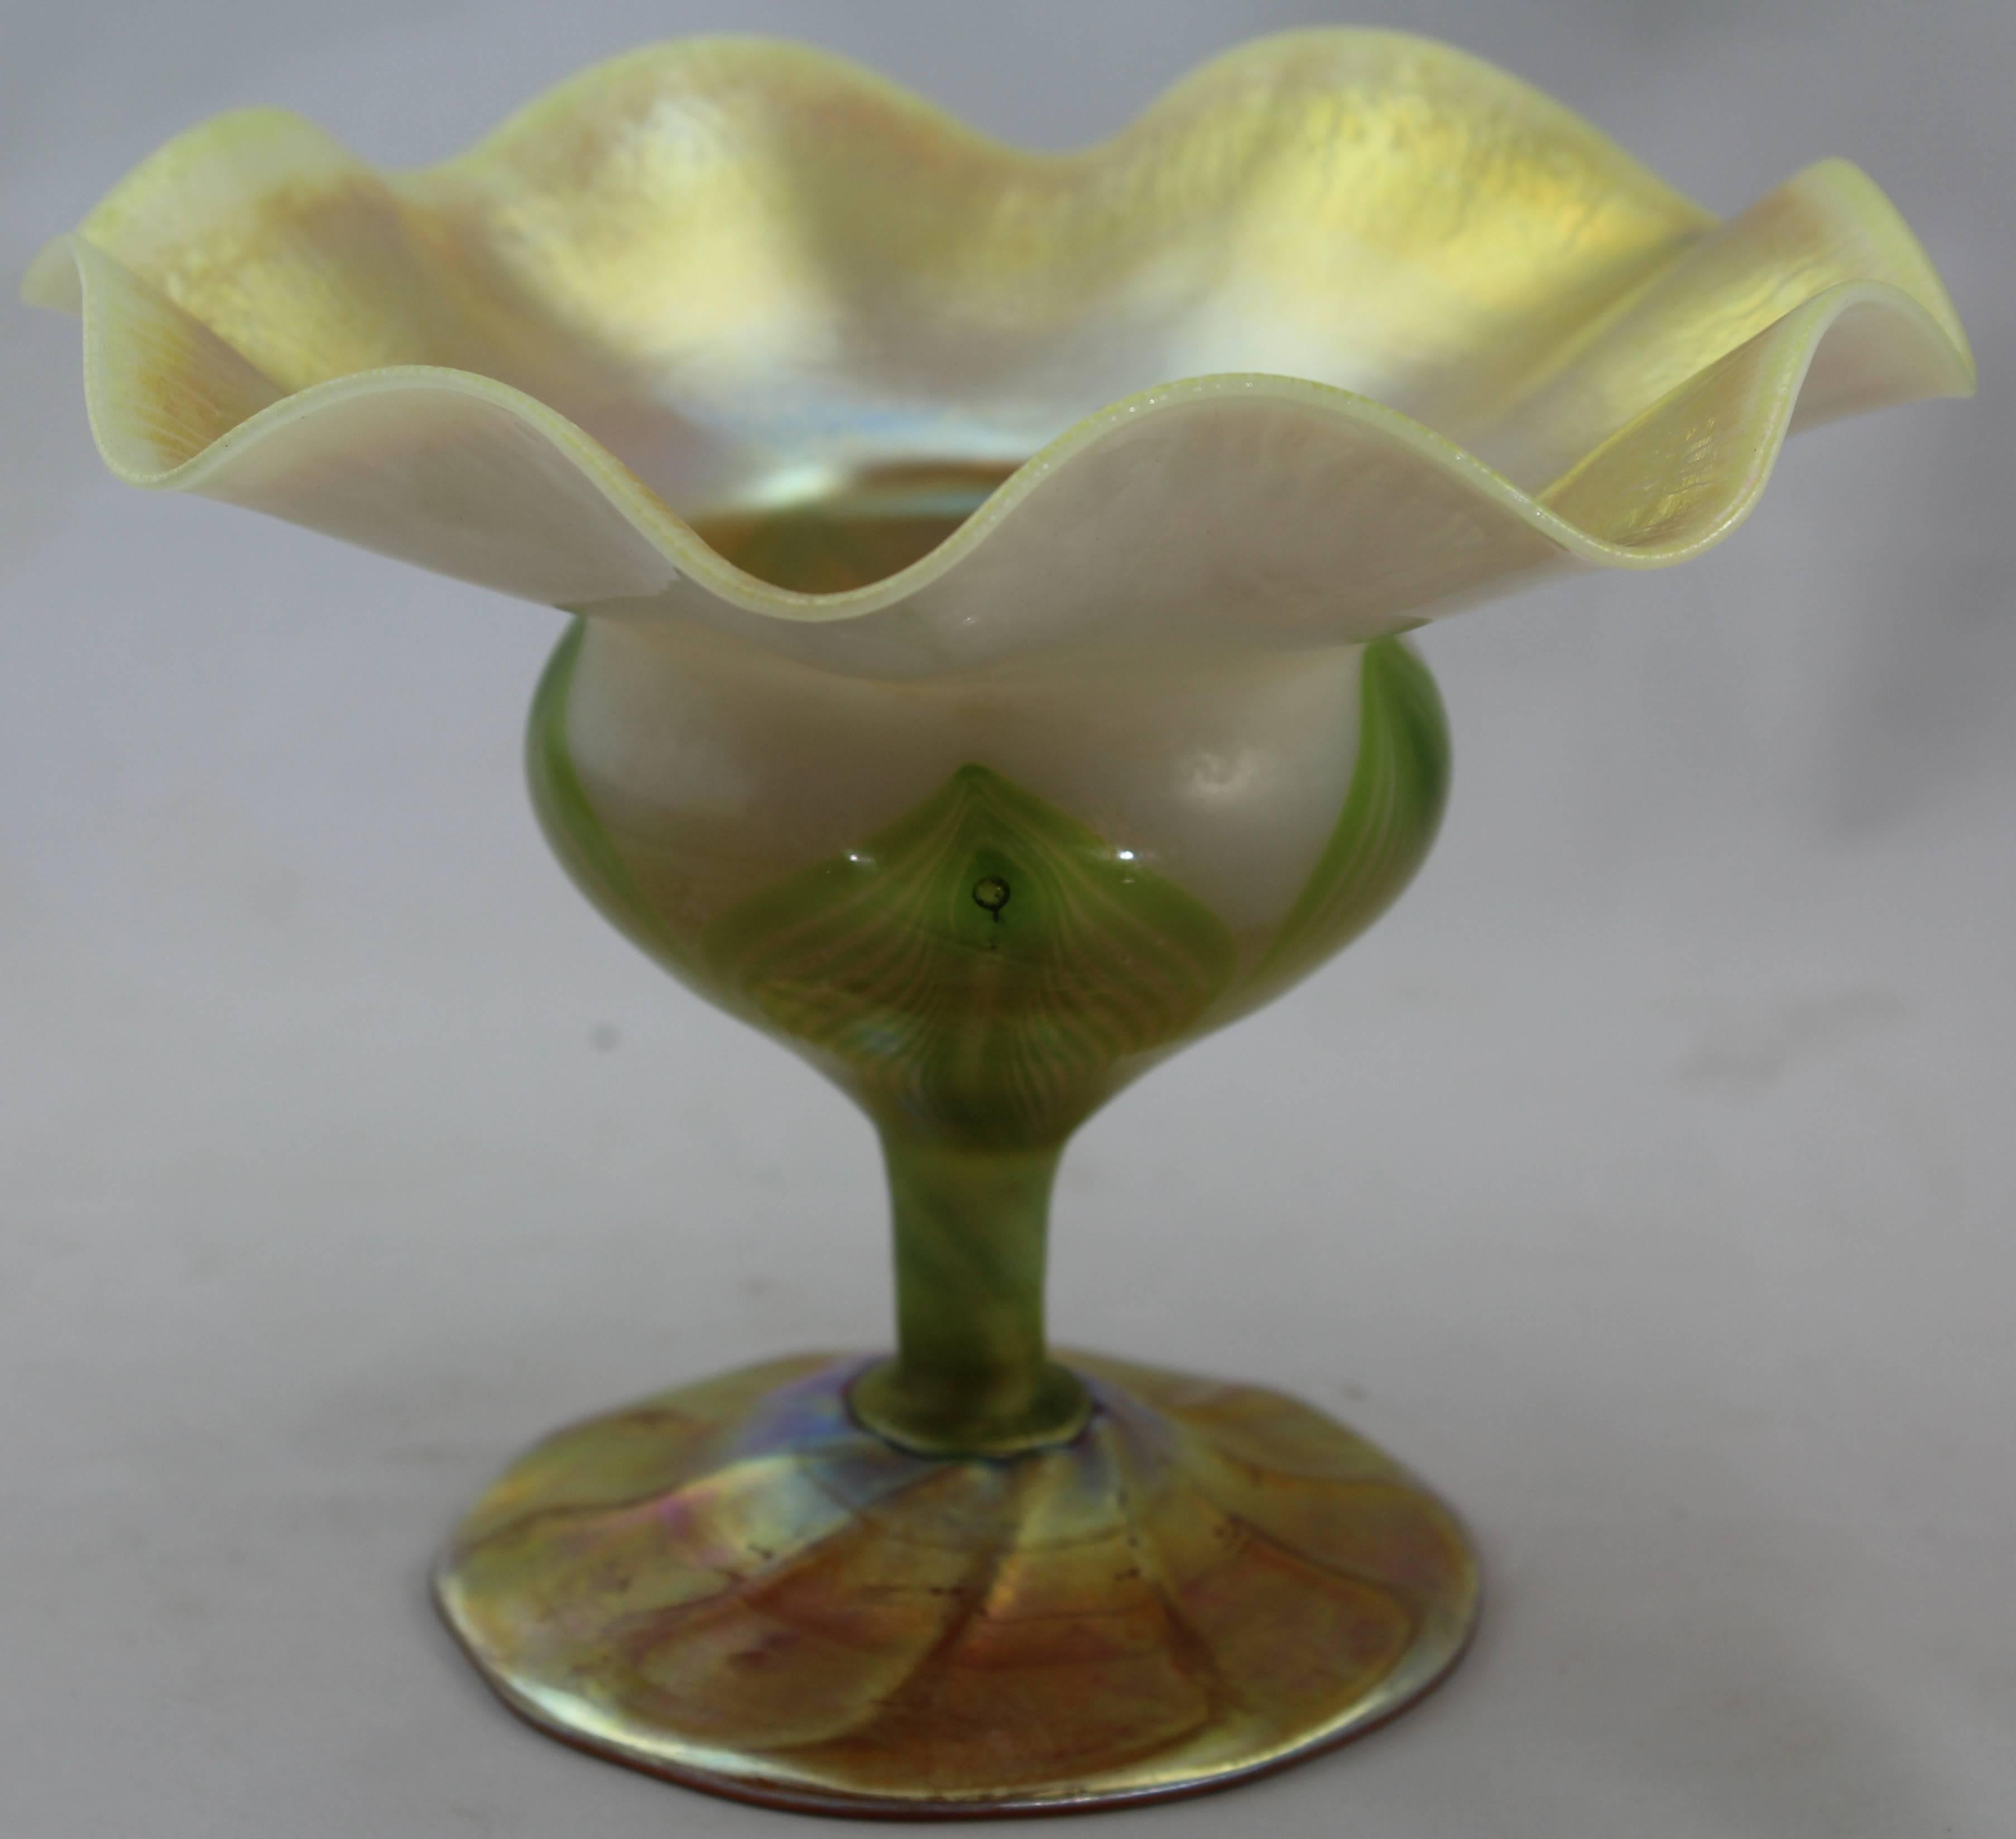 Tiffany Studios feather-pulled gold favrile glass floriform vase,
circa 1909. Engraved L.C. Tiffany - Favrile, 858 D.
Measures: Ht. 5-1/2 in.
From the estate of Helen Bentley. 

Condition Report*:

Attractive onion skin texture to the lip rim